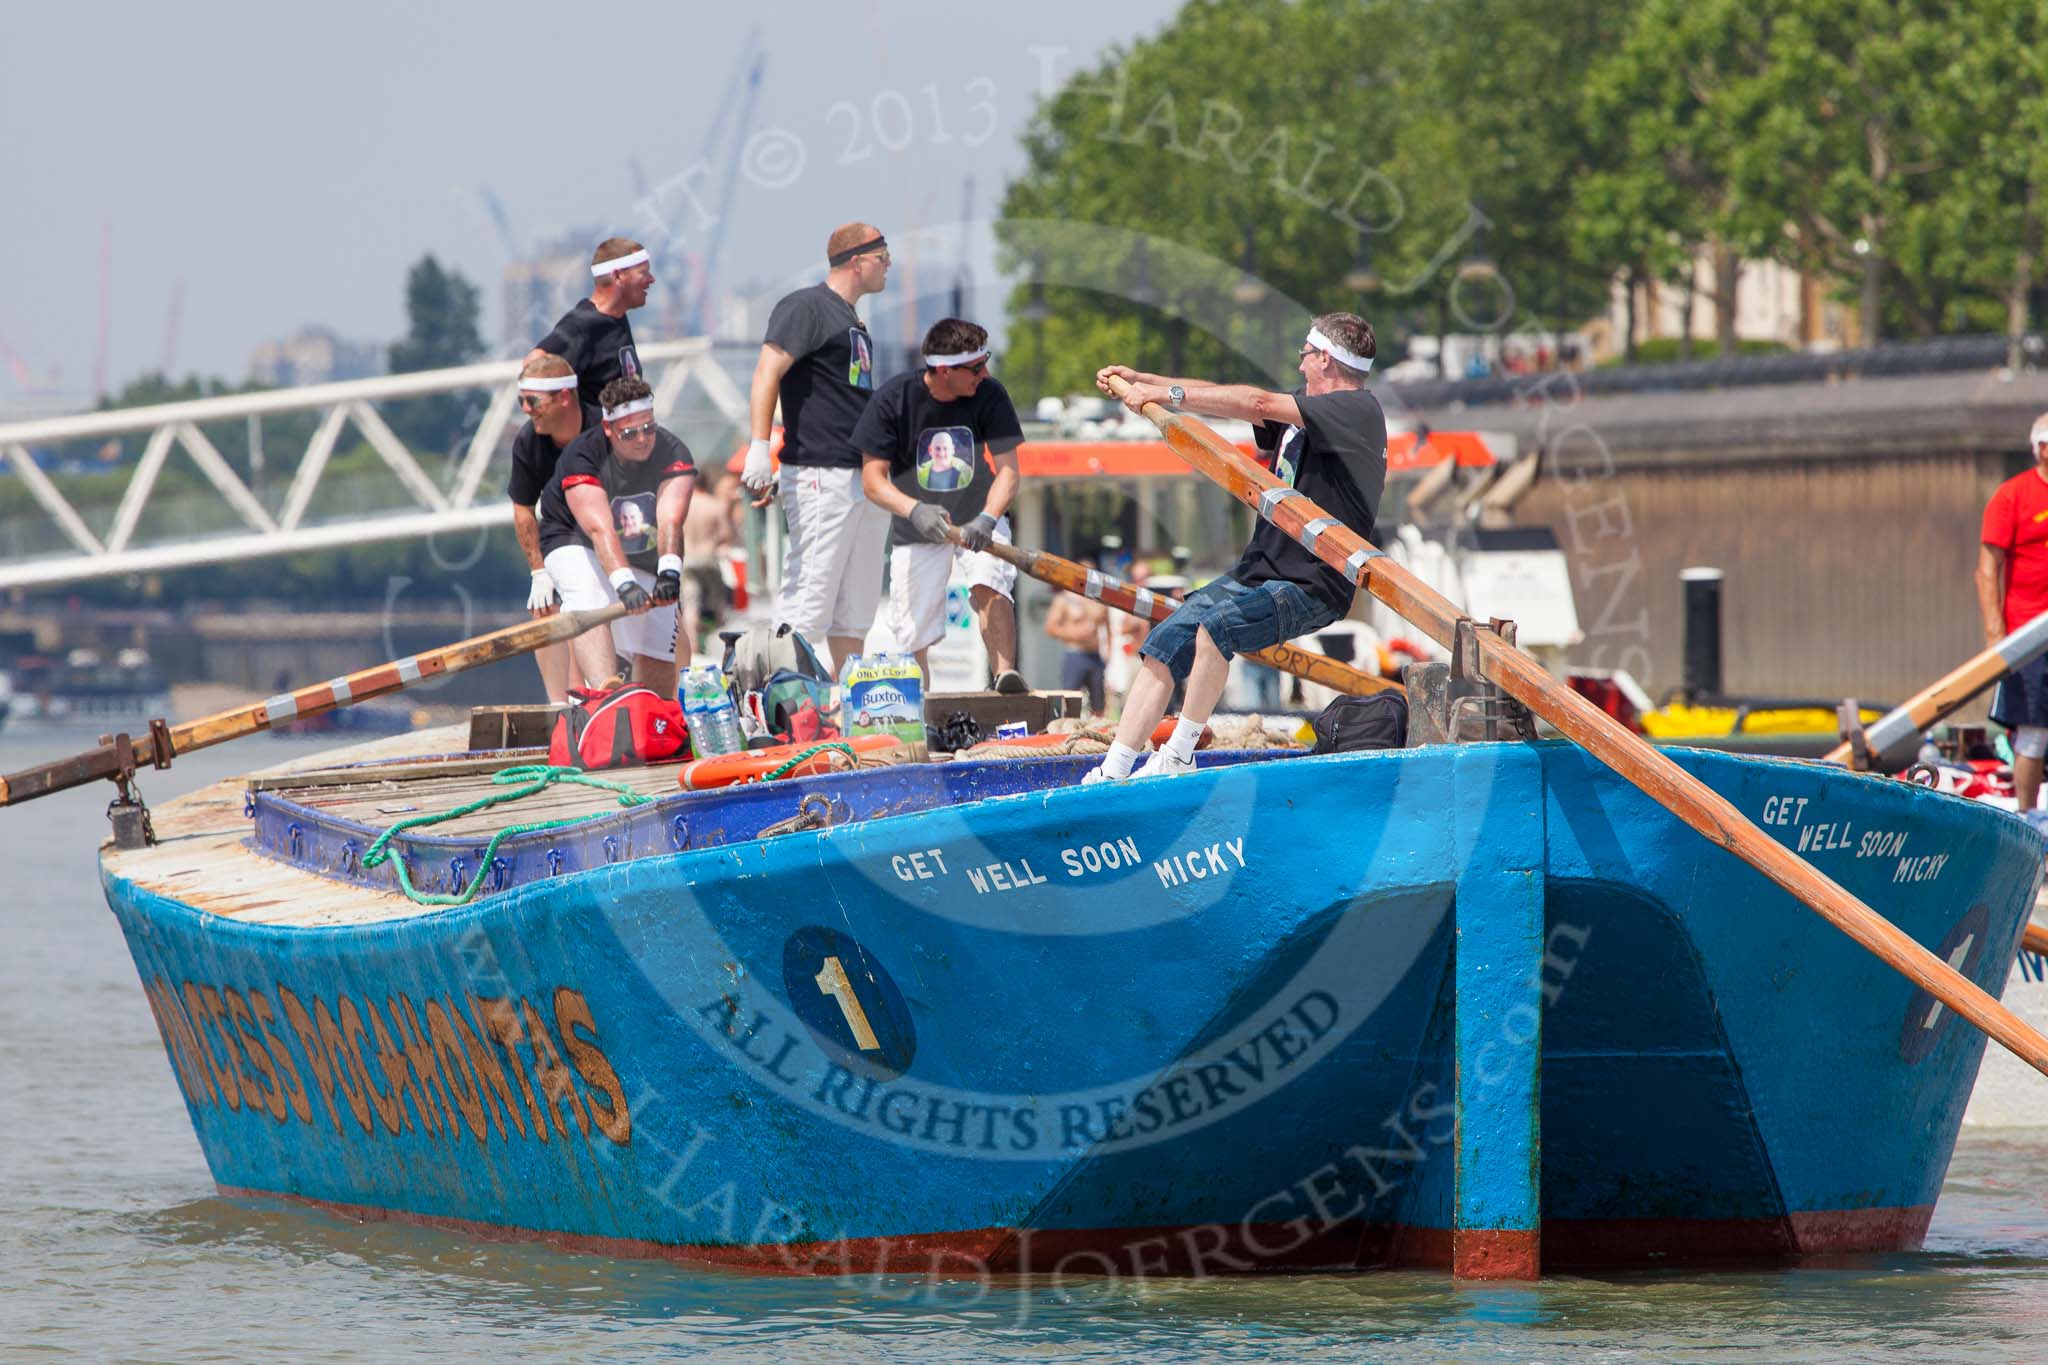 TOW River Thames Barge Driving Race 2013: Rear view of barge "Darren Lacey", by Princess Pocahontas, during the race, approaching Masthouse Terrace Pier.. On the right of "Darren Lacey" is barge "Spirit of Mountabatten", by Mechanical Movements and Enabling Services Ltd..
River Thames between Greenwich and Westminster,
London,

United Kingdom,
on 13 July 2013 at 12:42, image #181